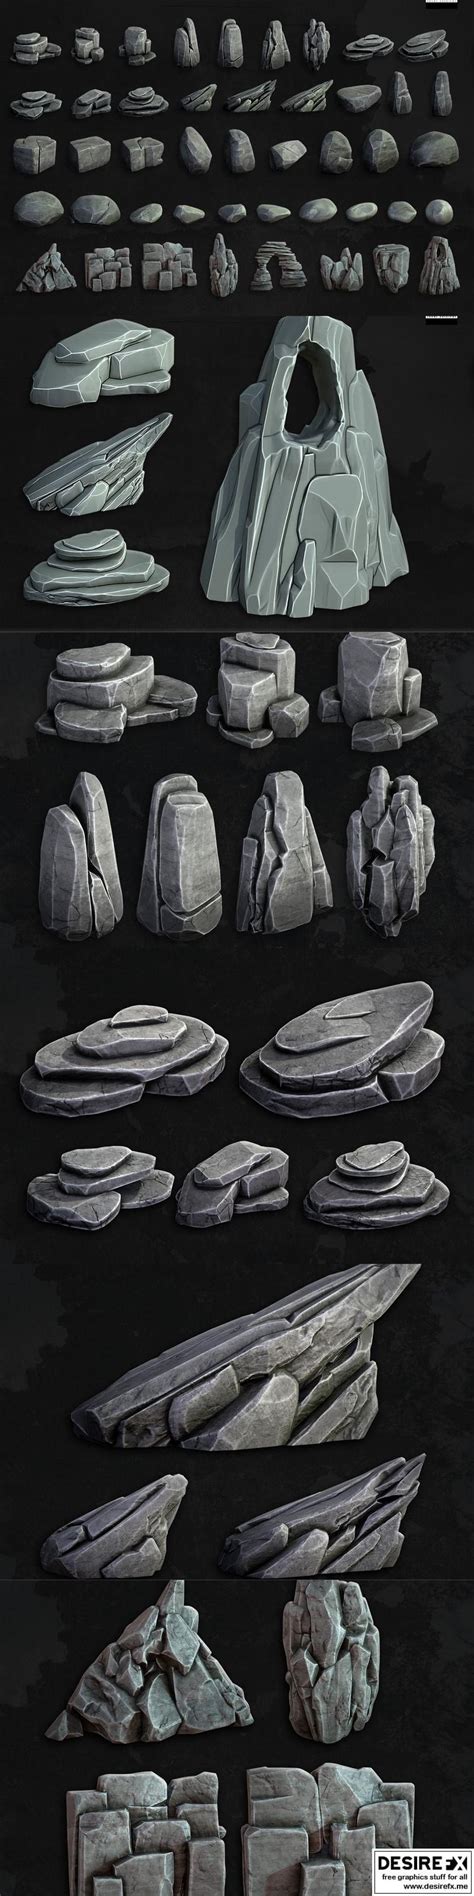 Desire Fx 3d Models Stylized Rock Asset Pack By J Roscinas Low Poly